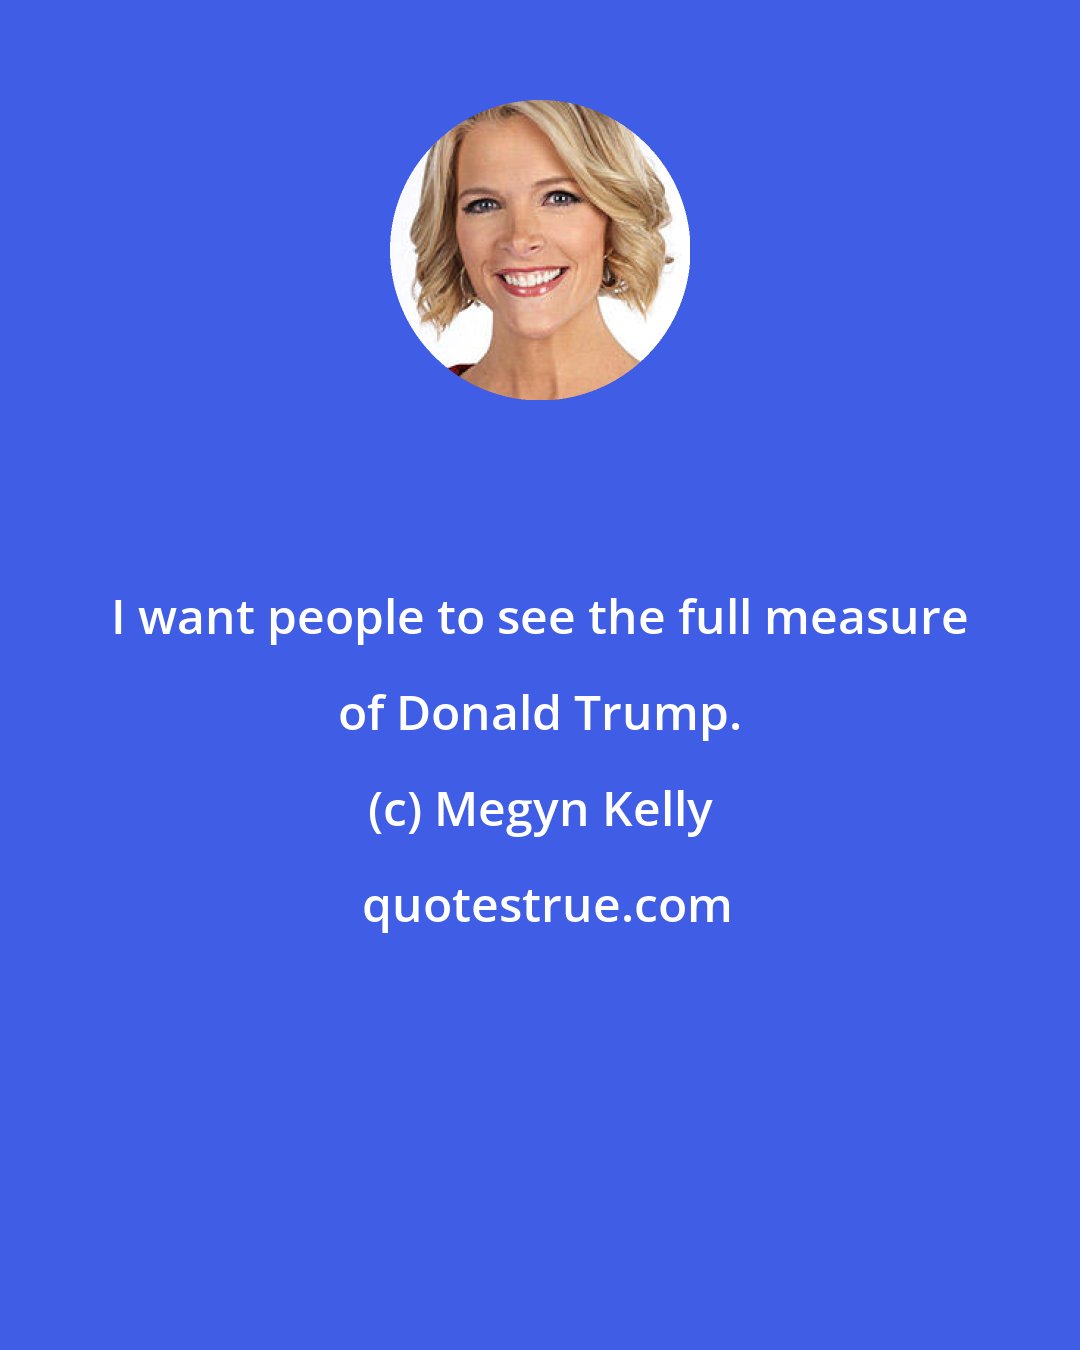 Megyn Kelly: I want people to see the full measure of Donald Trump.